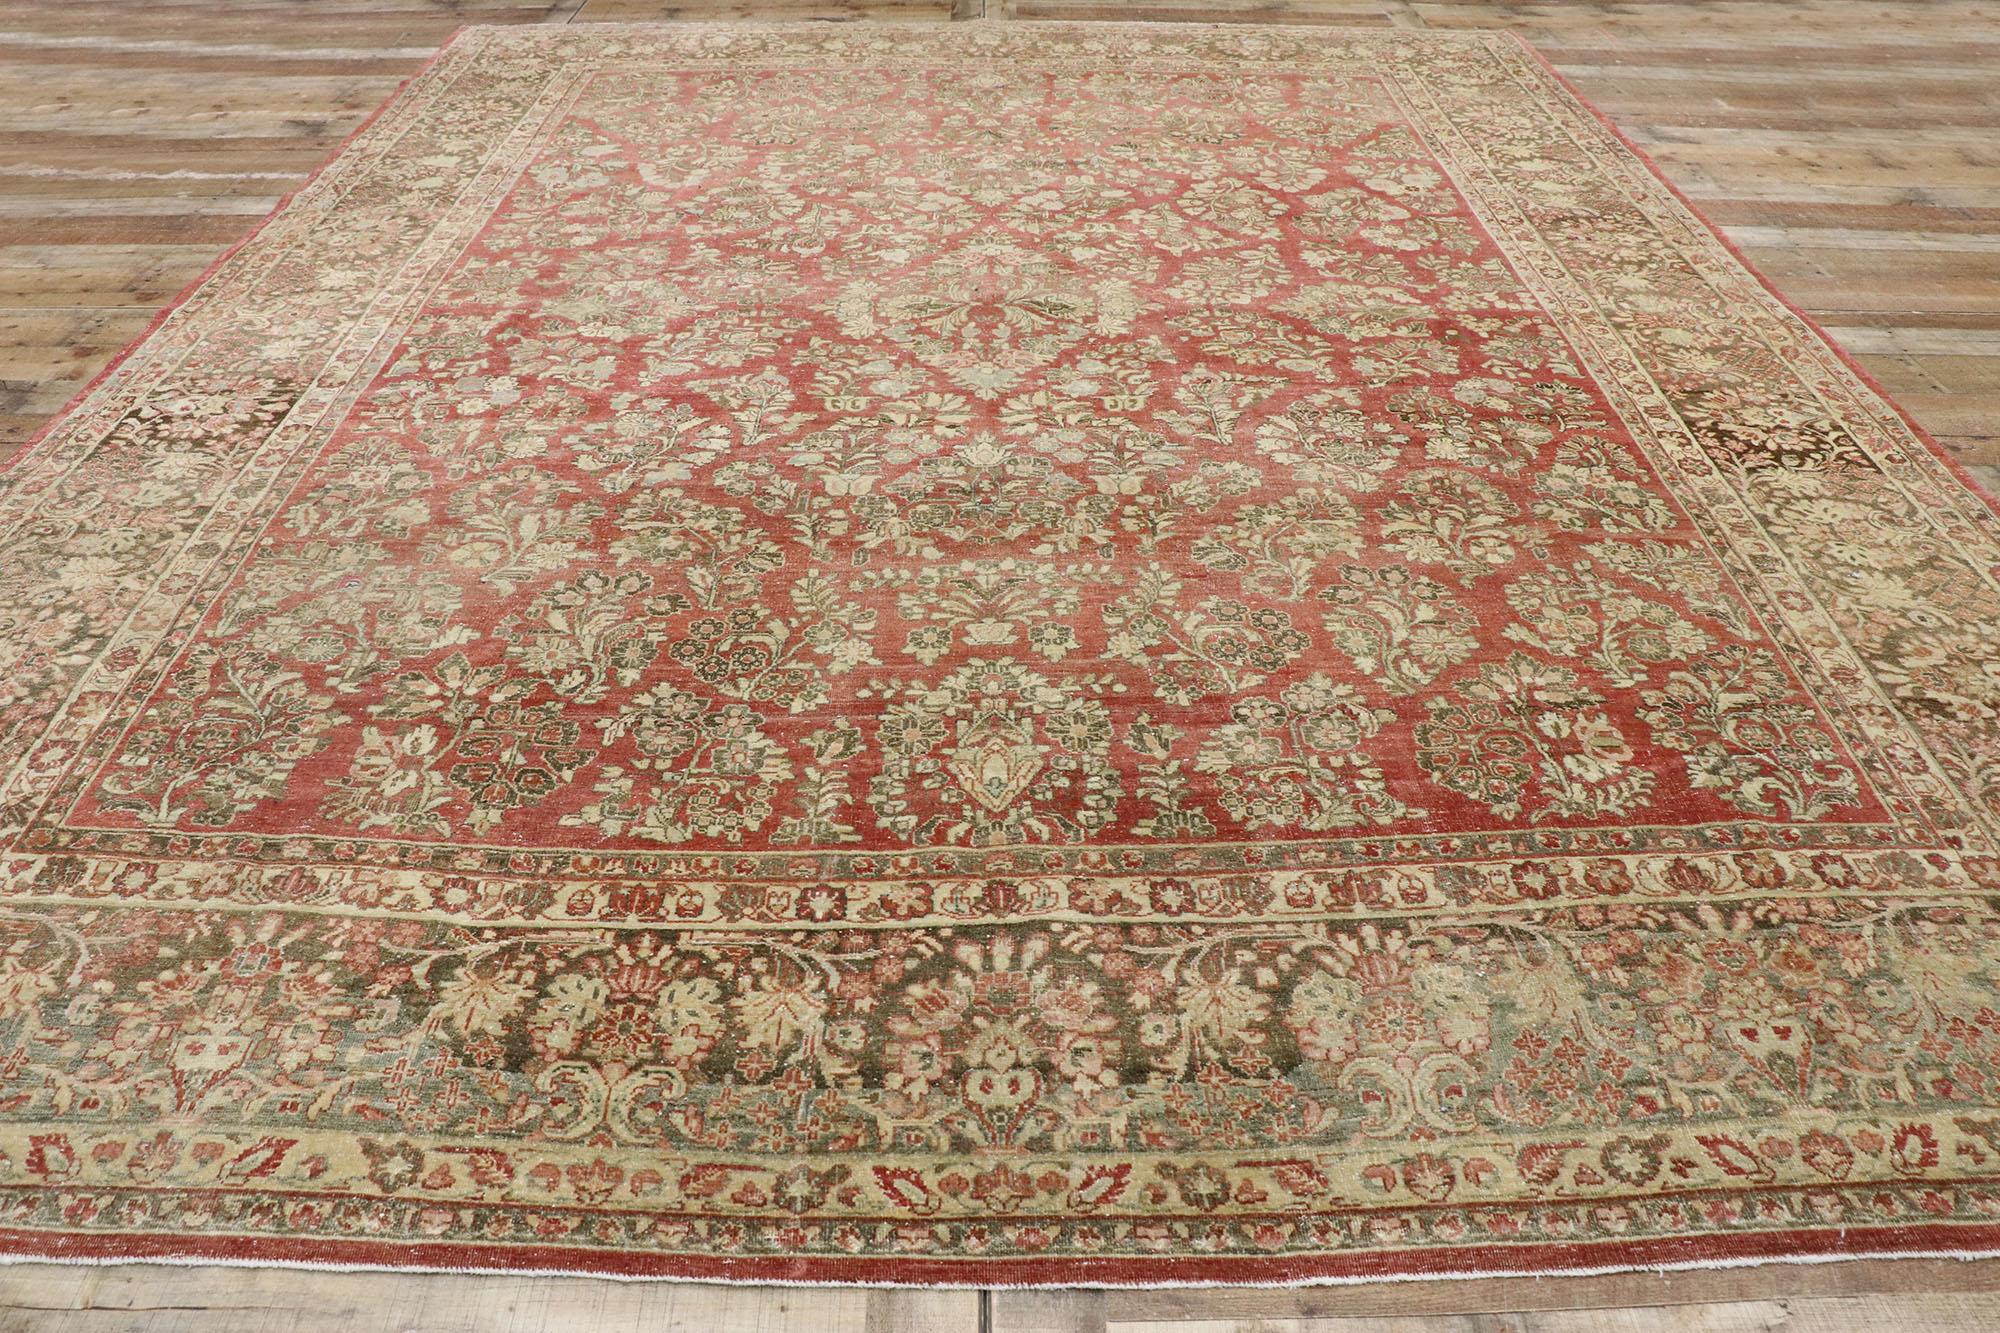 Wool Distressed Antique Persian Sarouk Rug with Rustic American Traditional Style For Sale